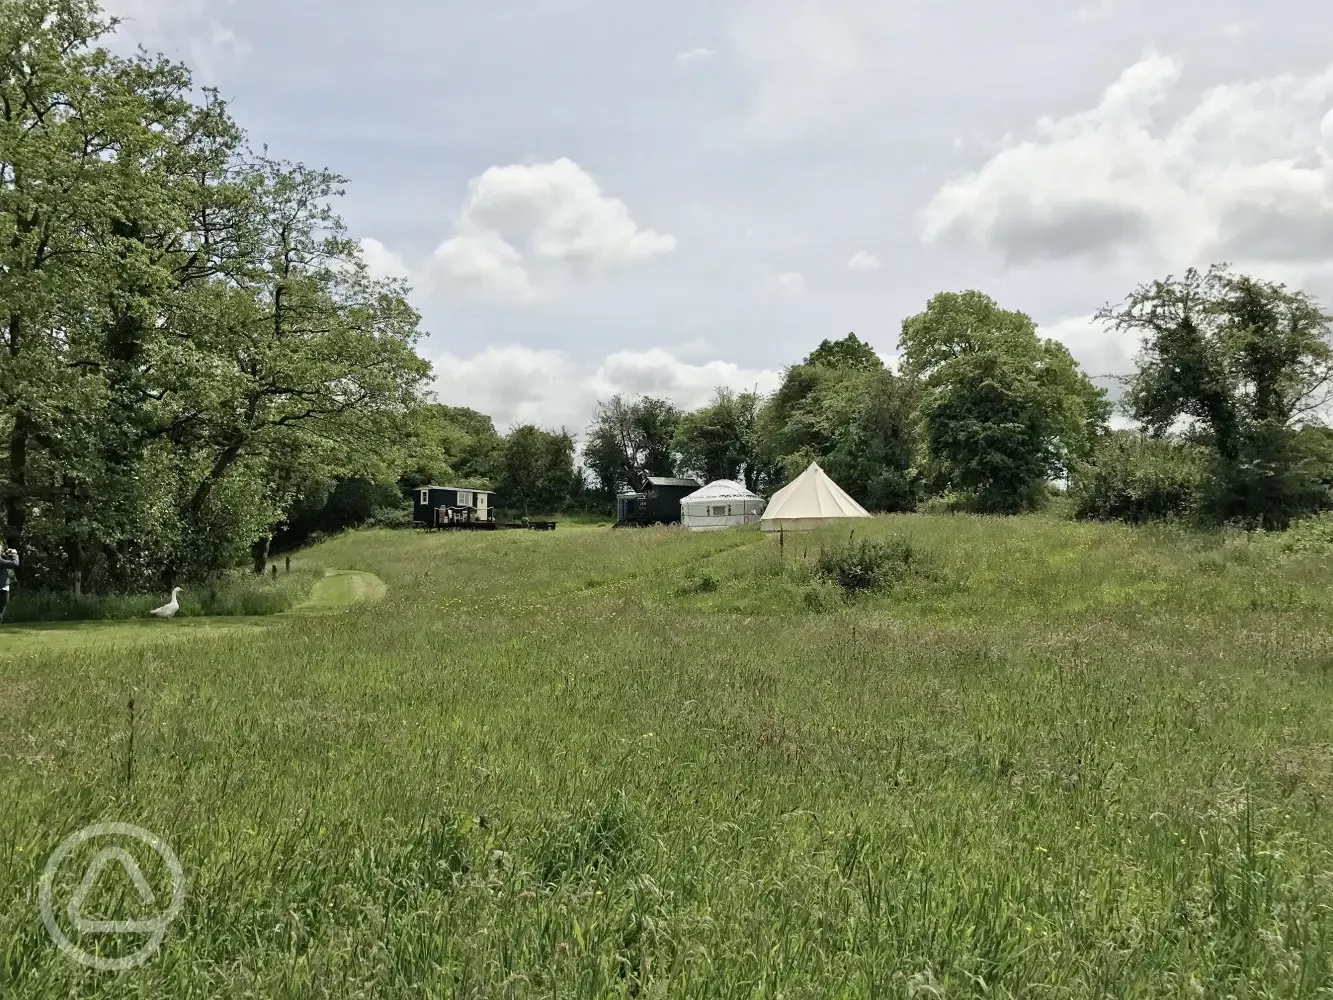 View of the Cwt Gwyrdd site from the meadow